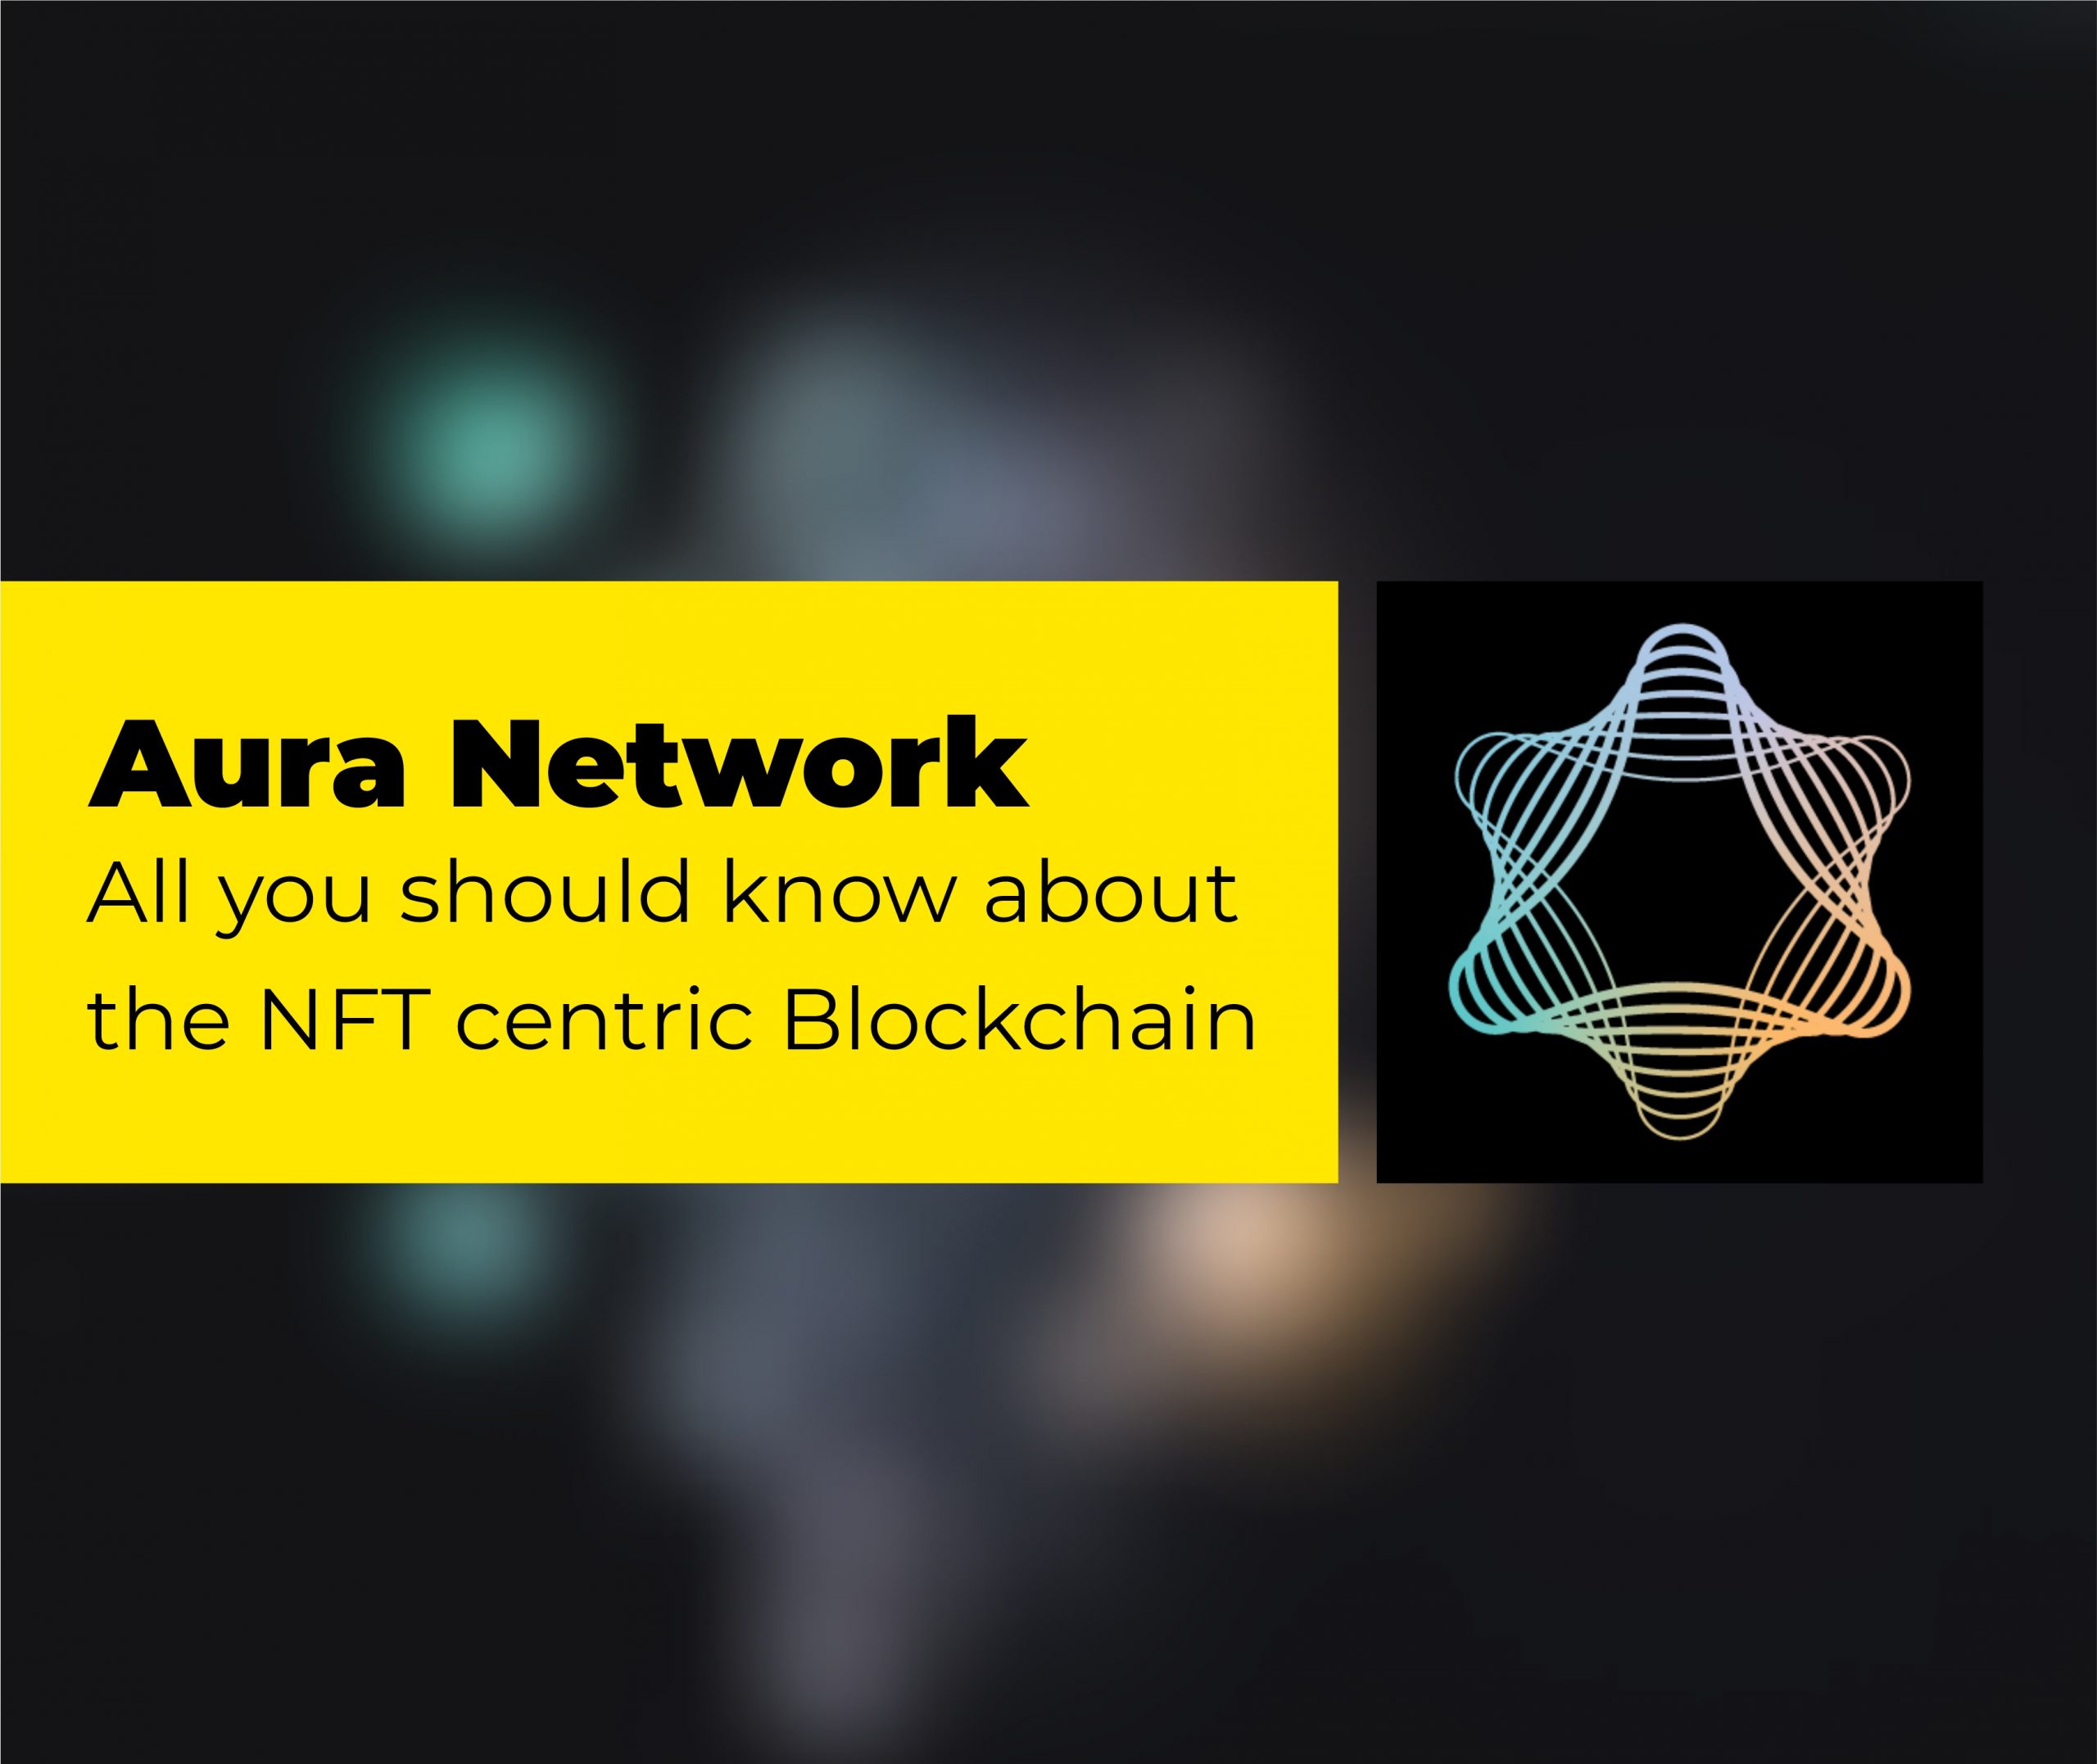 Aura Network: All you should know about the NFT centric Blockchain